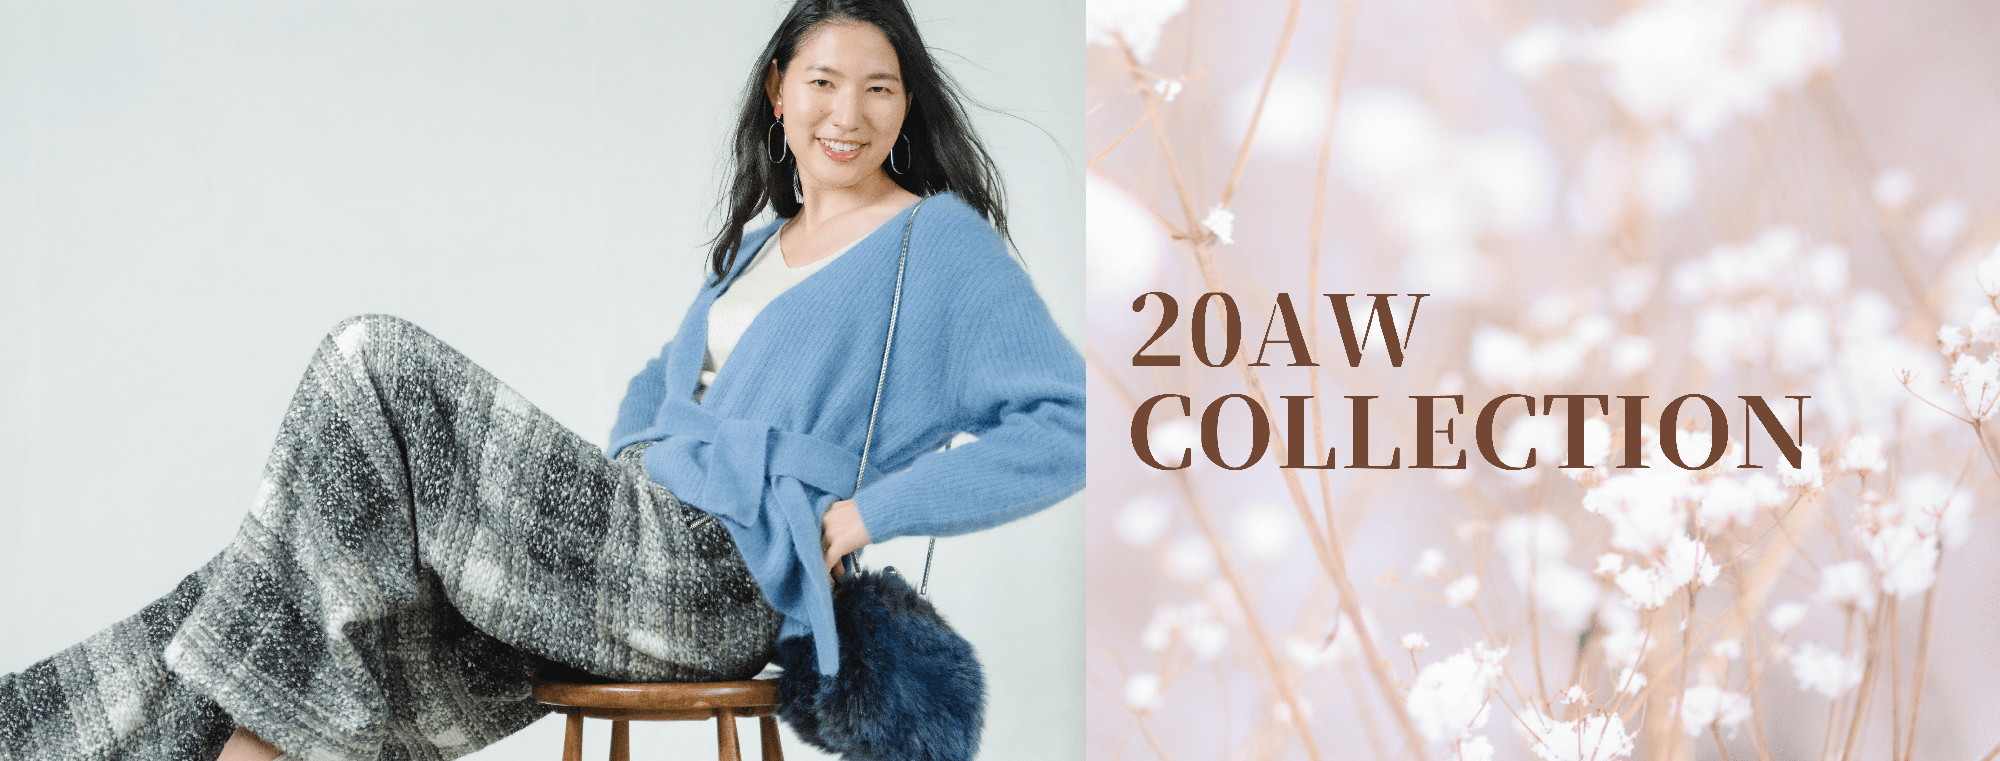 20AW Collection